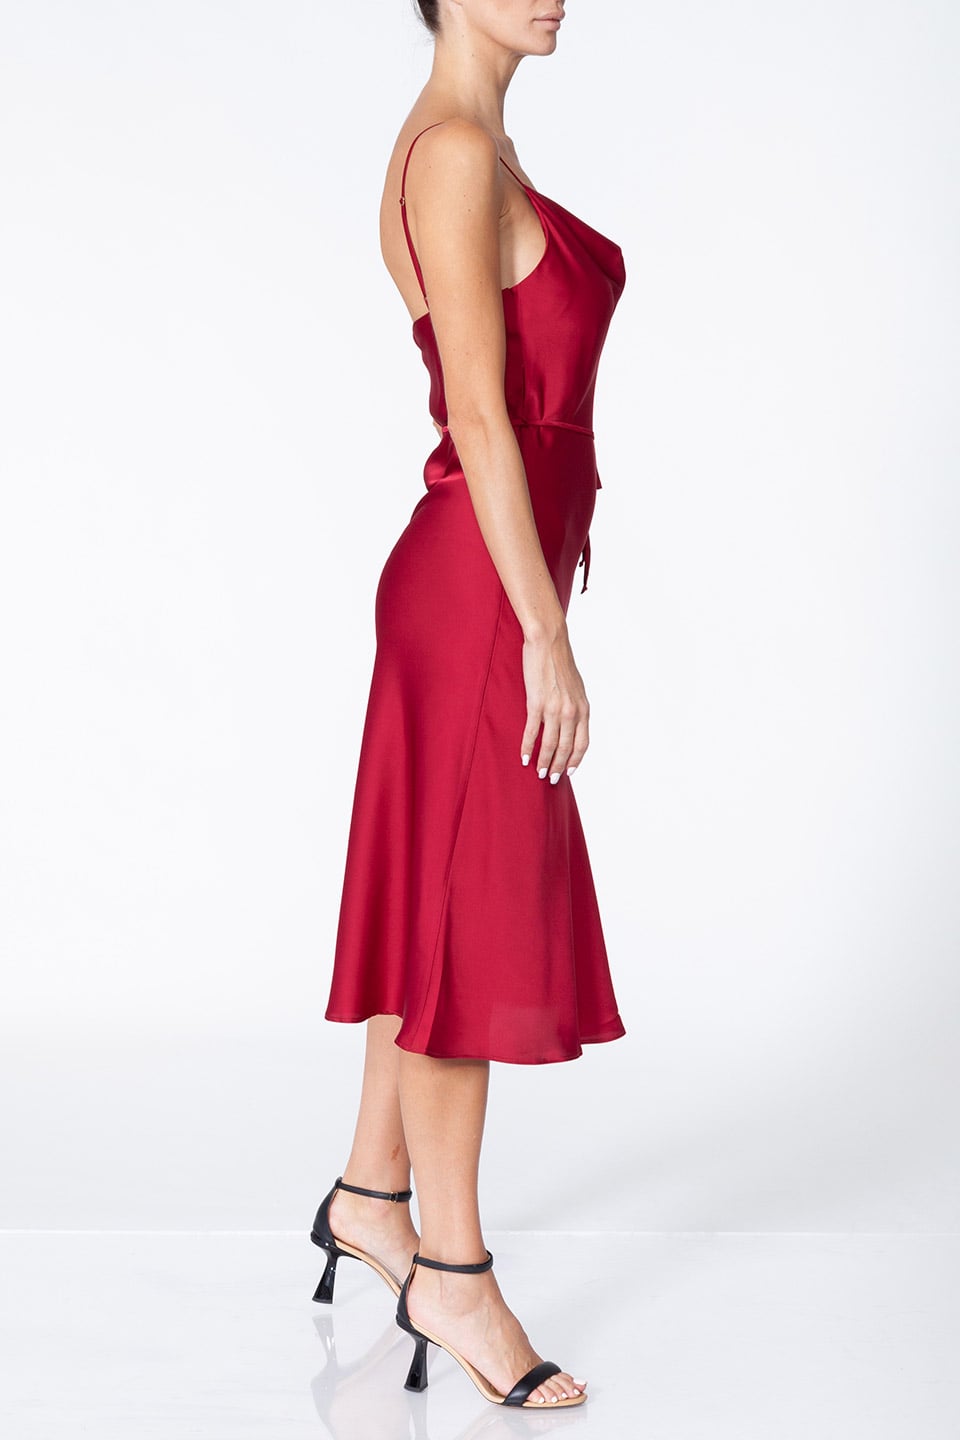 Thumbnail for Product gallery 2, Shop online beautiful dress for special occasions. Fashion designer midi dress in red color